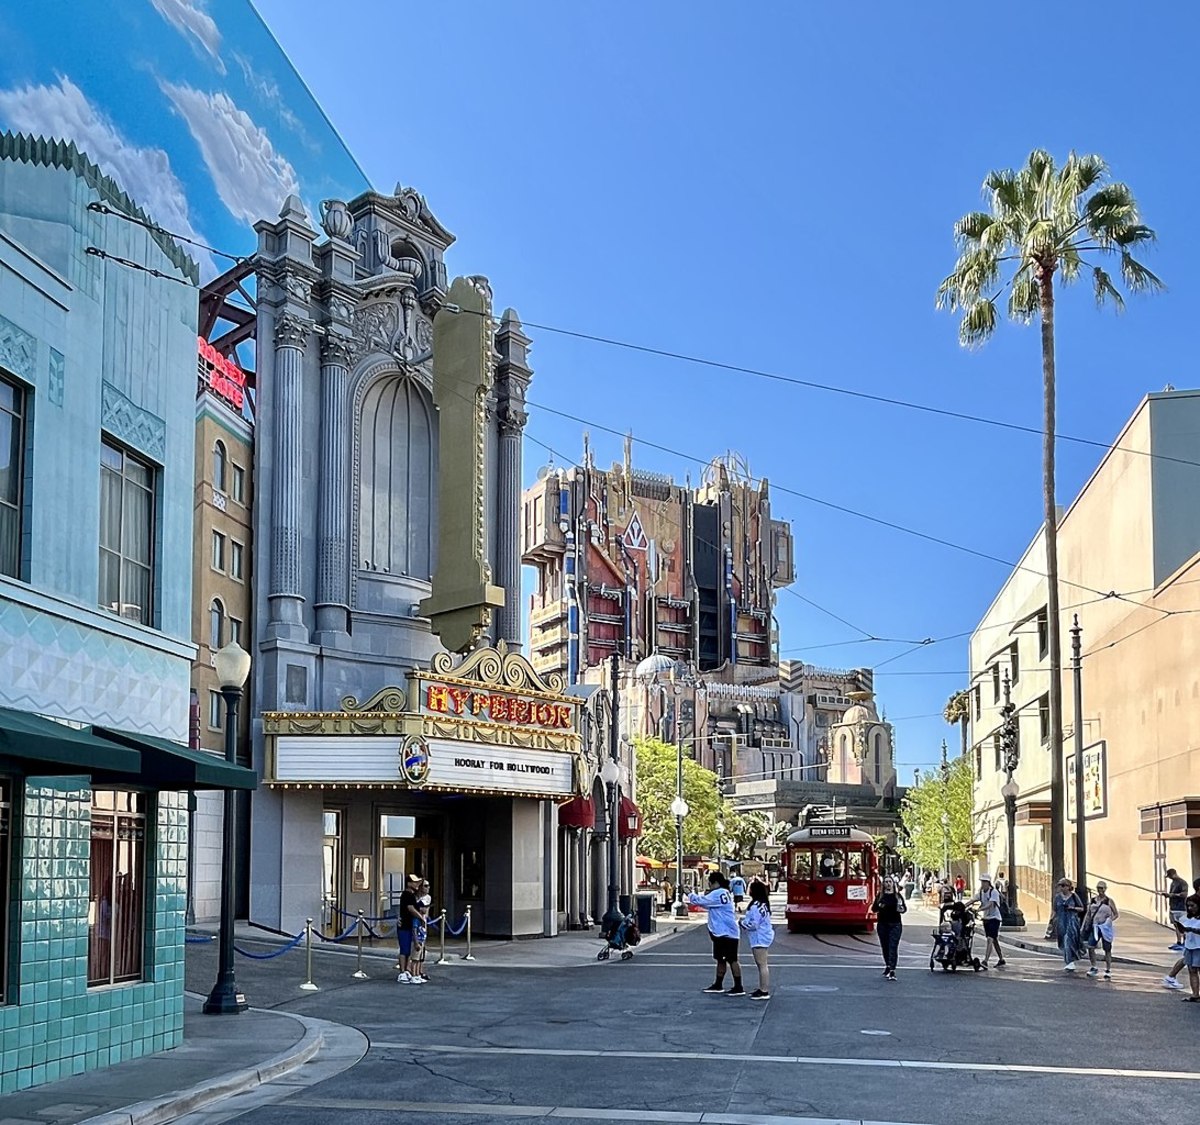 Disneyland and its companion California Adventure (pictured here) are two of the most popular theme parks in the world and are both located in Orange County. 